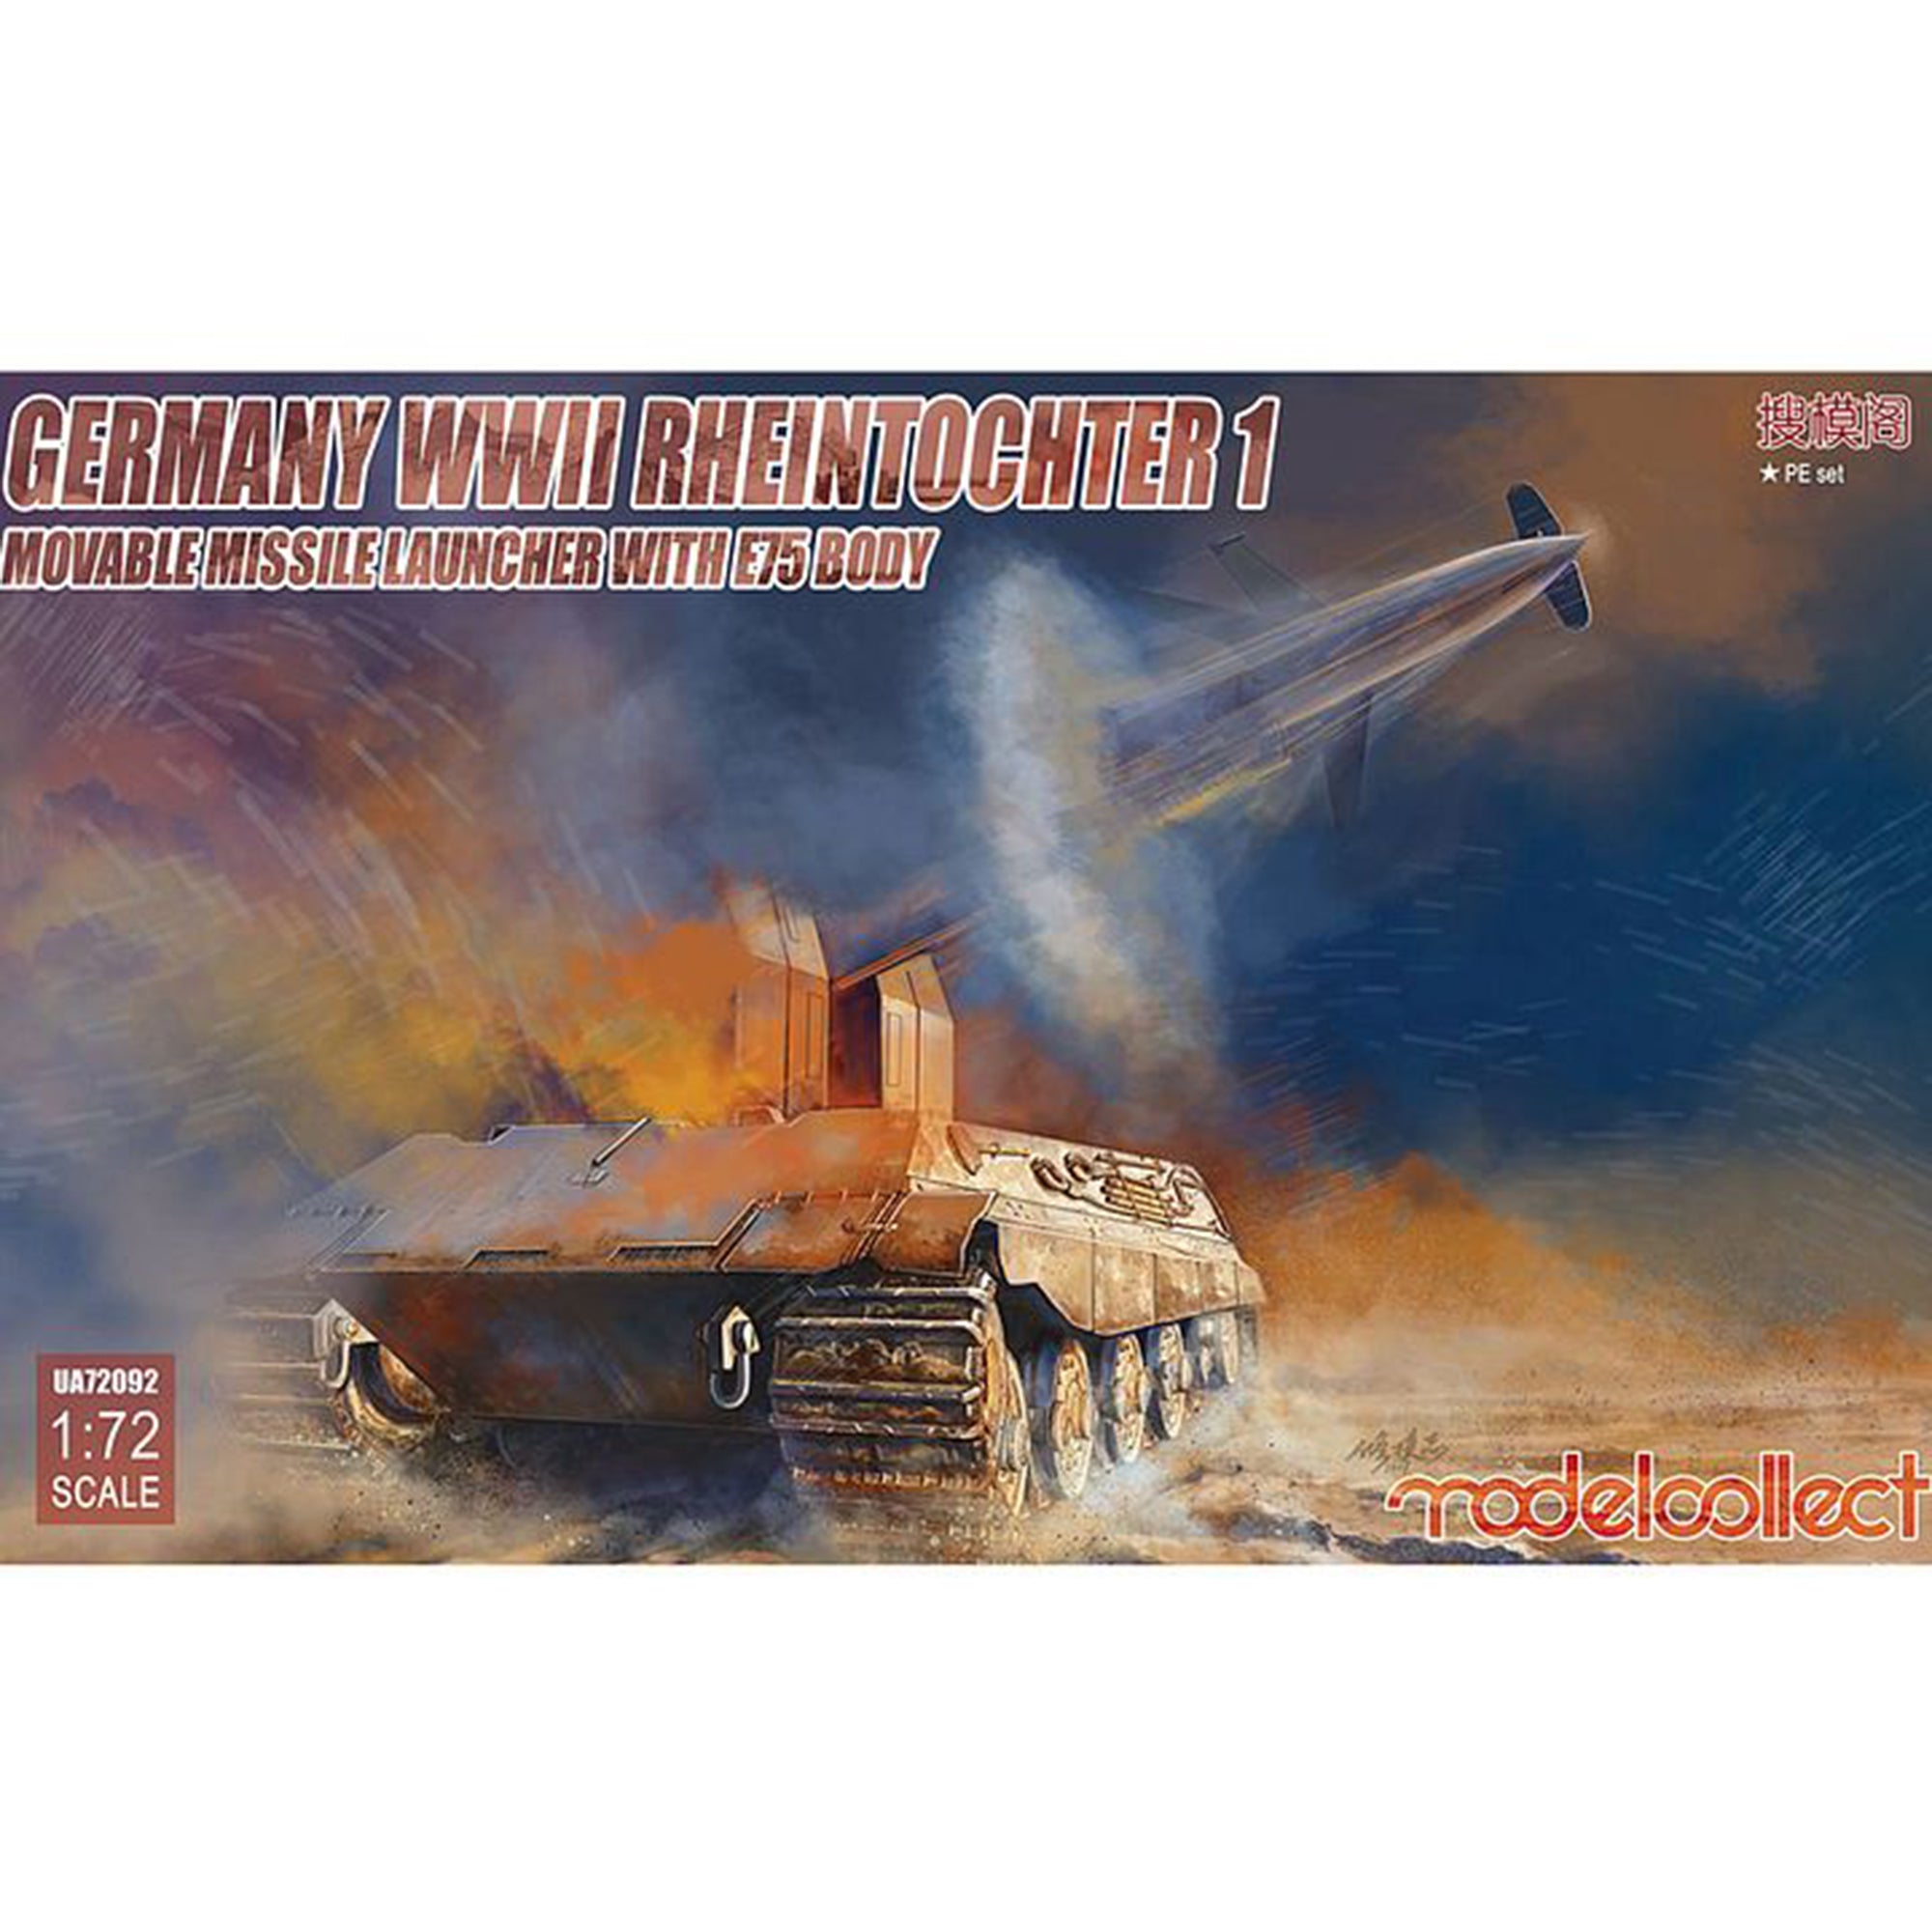 Modelcollect UA72092 1/72 Germany WWII Rheintochter 1 Movable Missile Launcher With E75 Body Model Kit